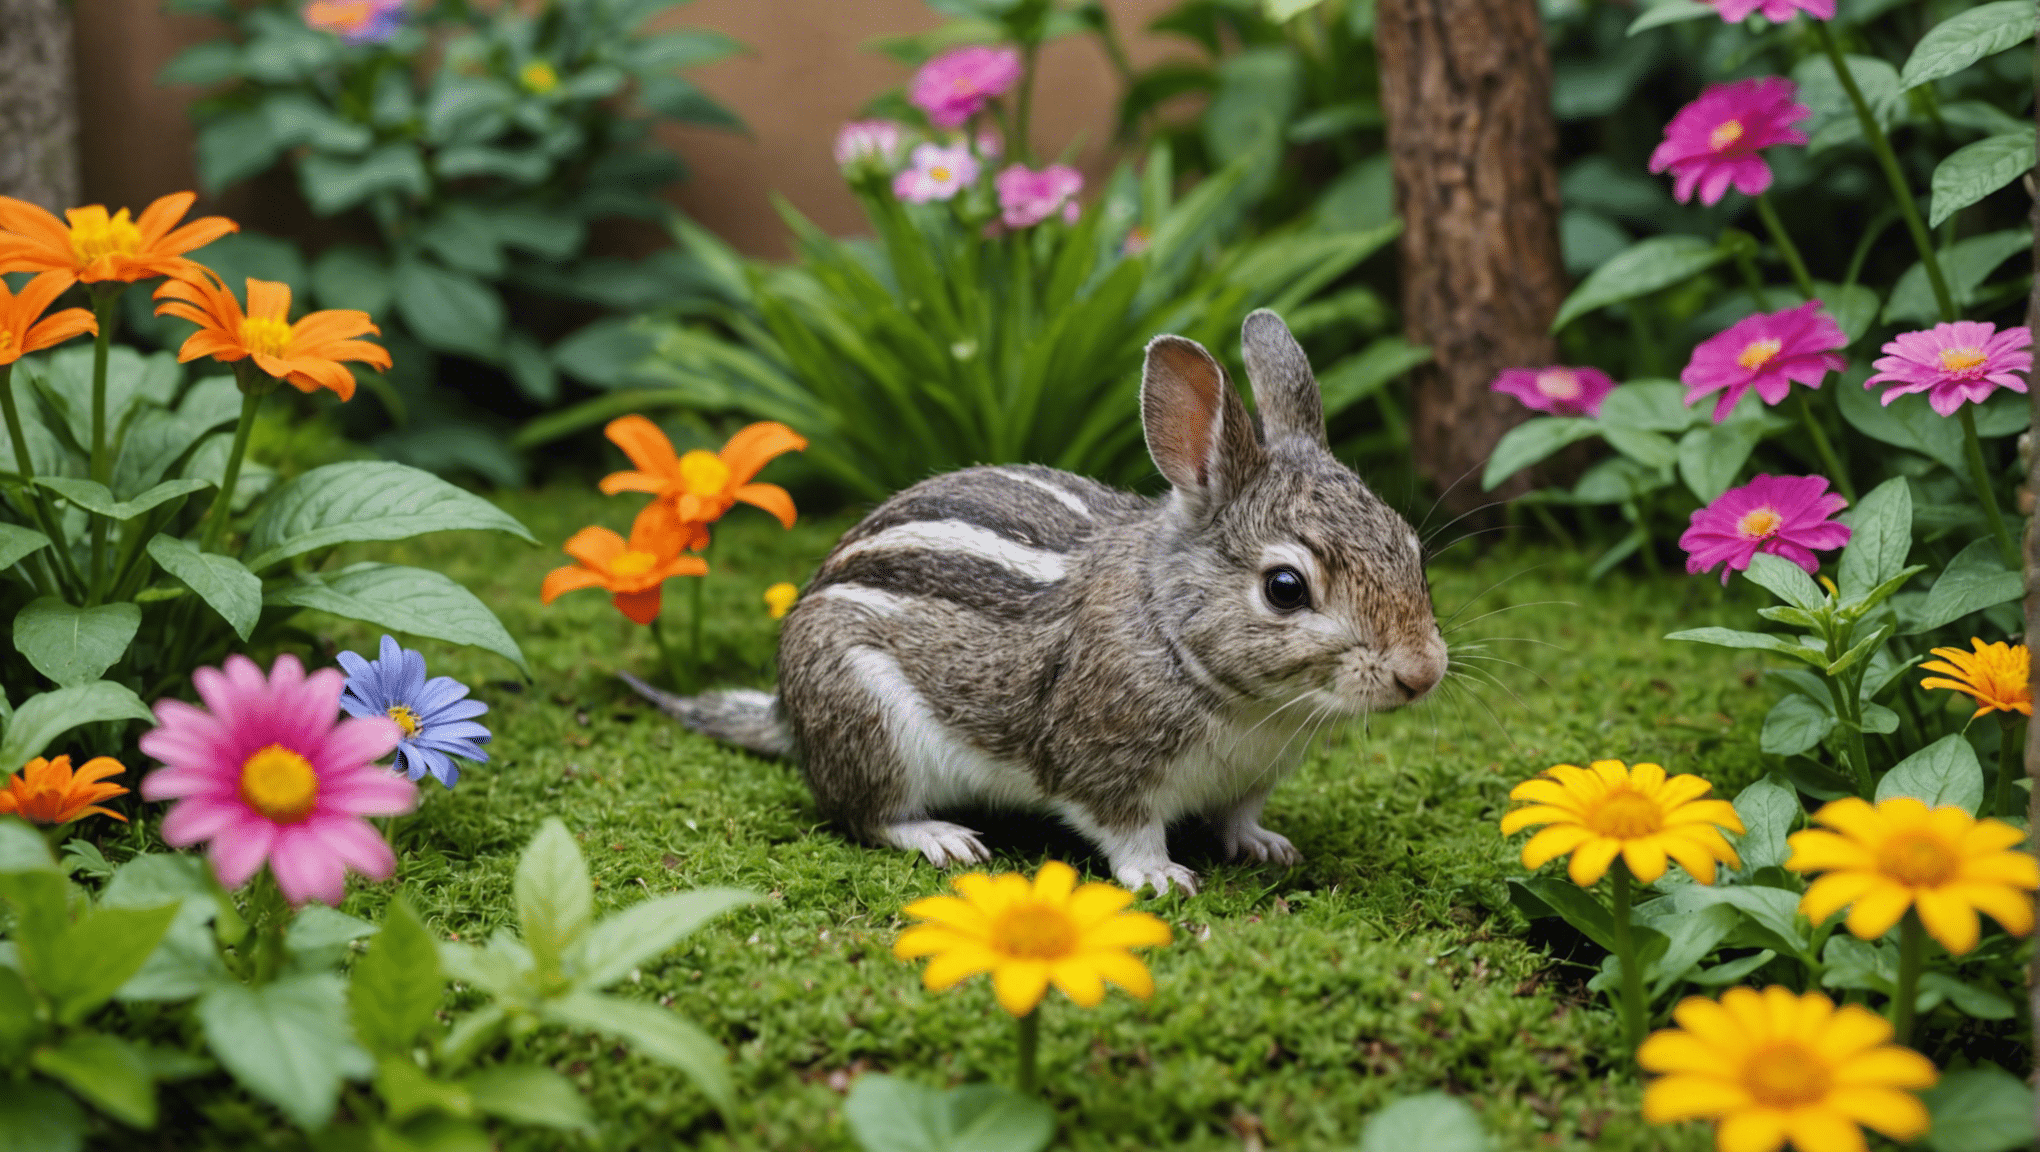 discover the diverse range of small animals that inhabit your backyard, from colorful birds to playful squirrels and fascinating insects.